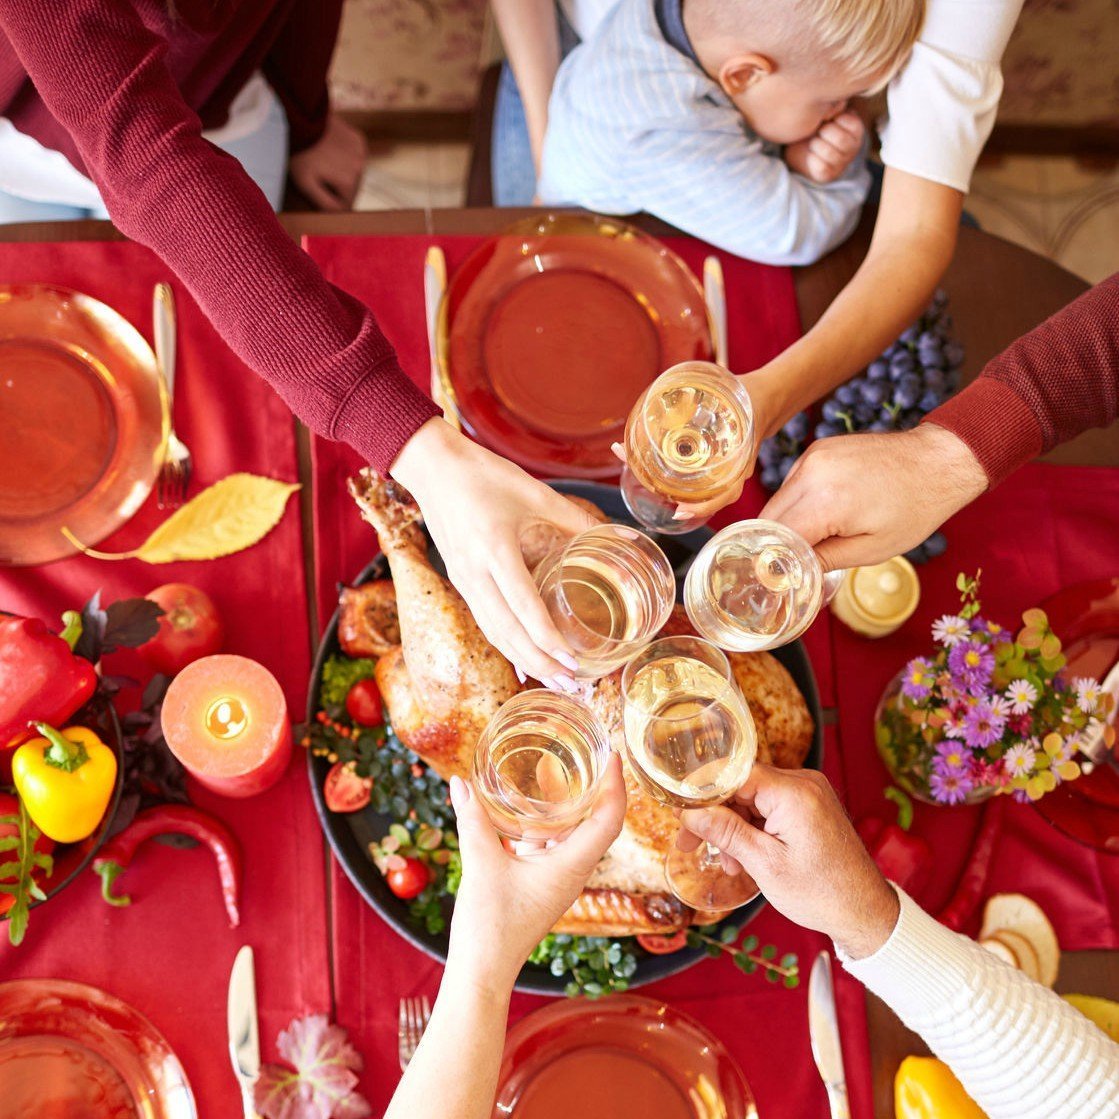 6 Thanksgiving Foods You May Want To Avoid If Breastfeeding